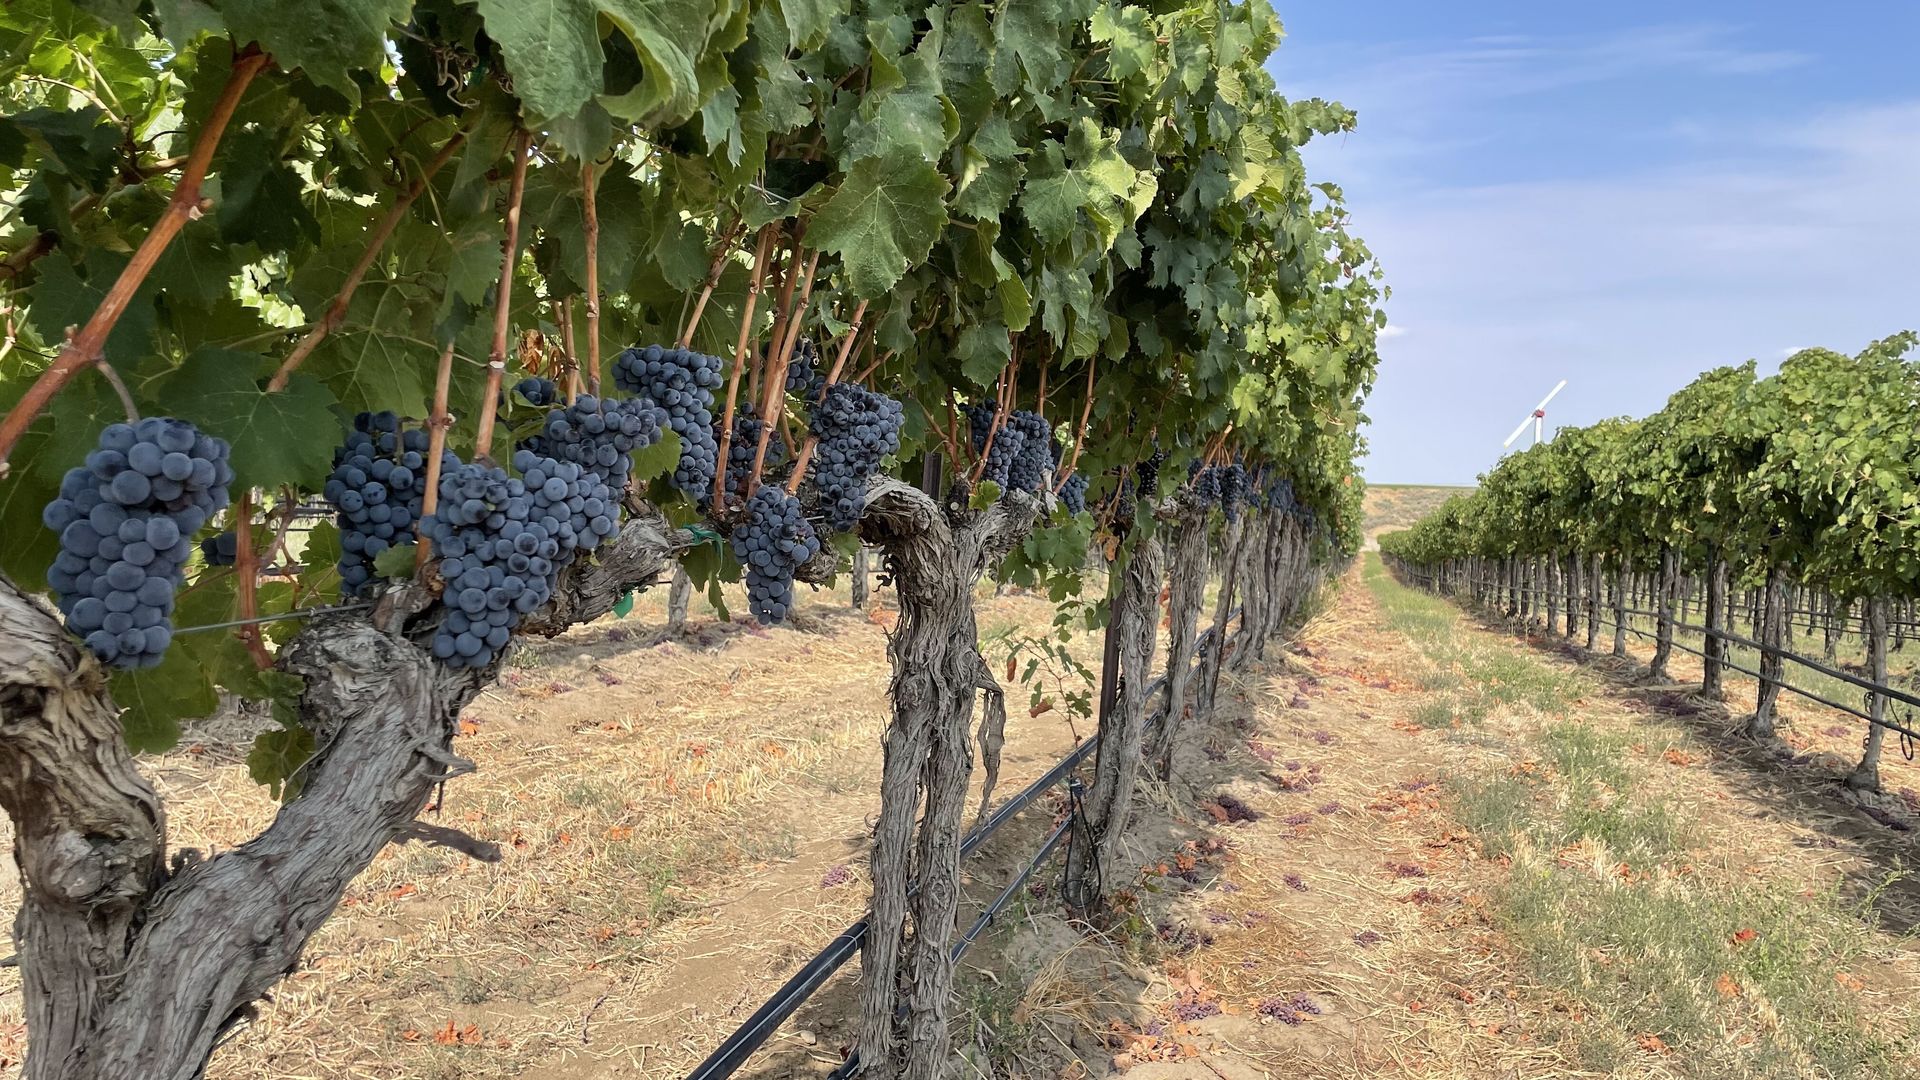 Photo of grapes hanging from vines in a vineyard, with blue skies behind.